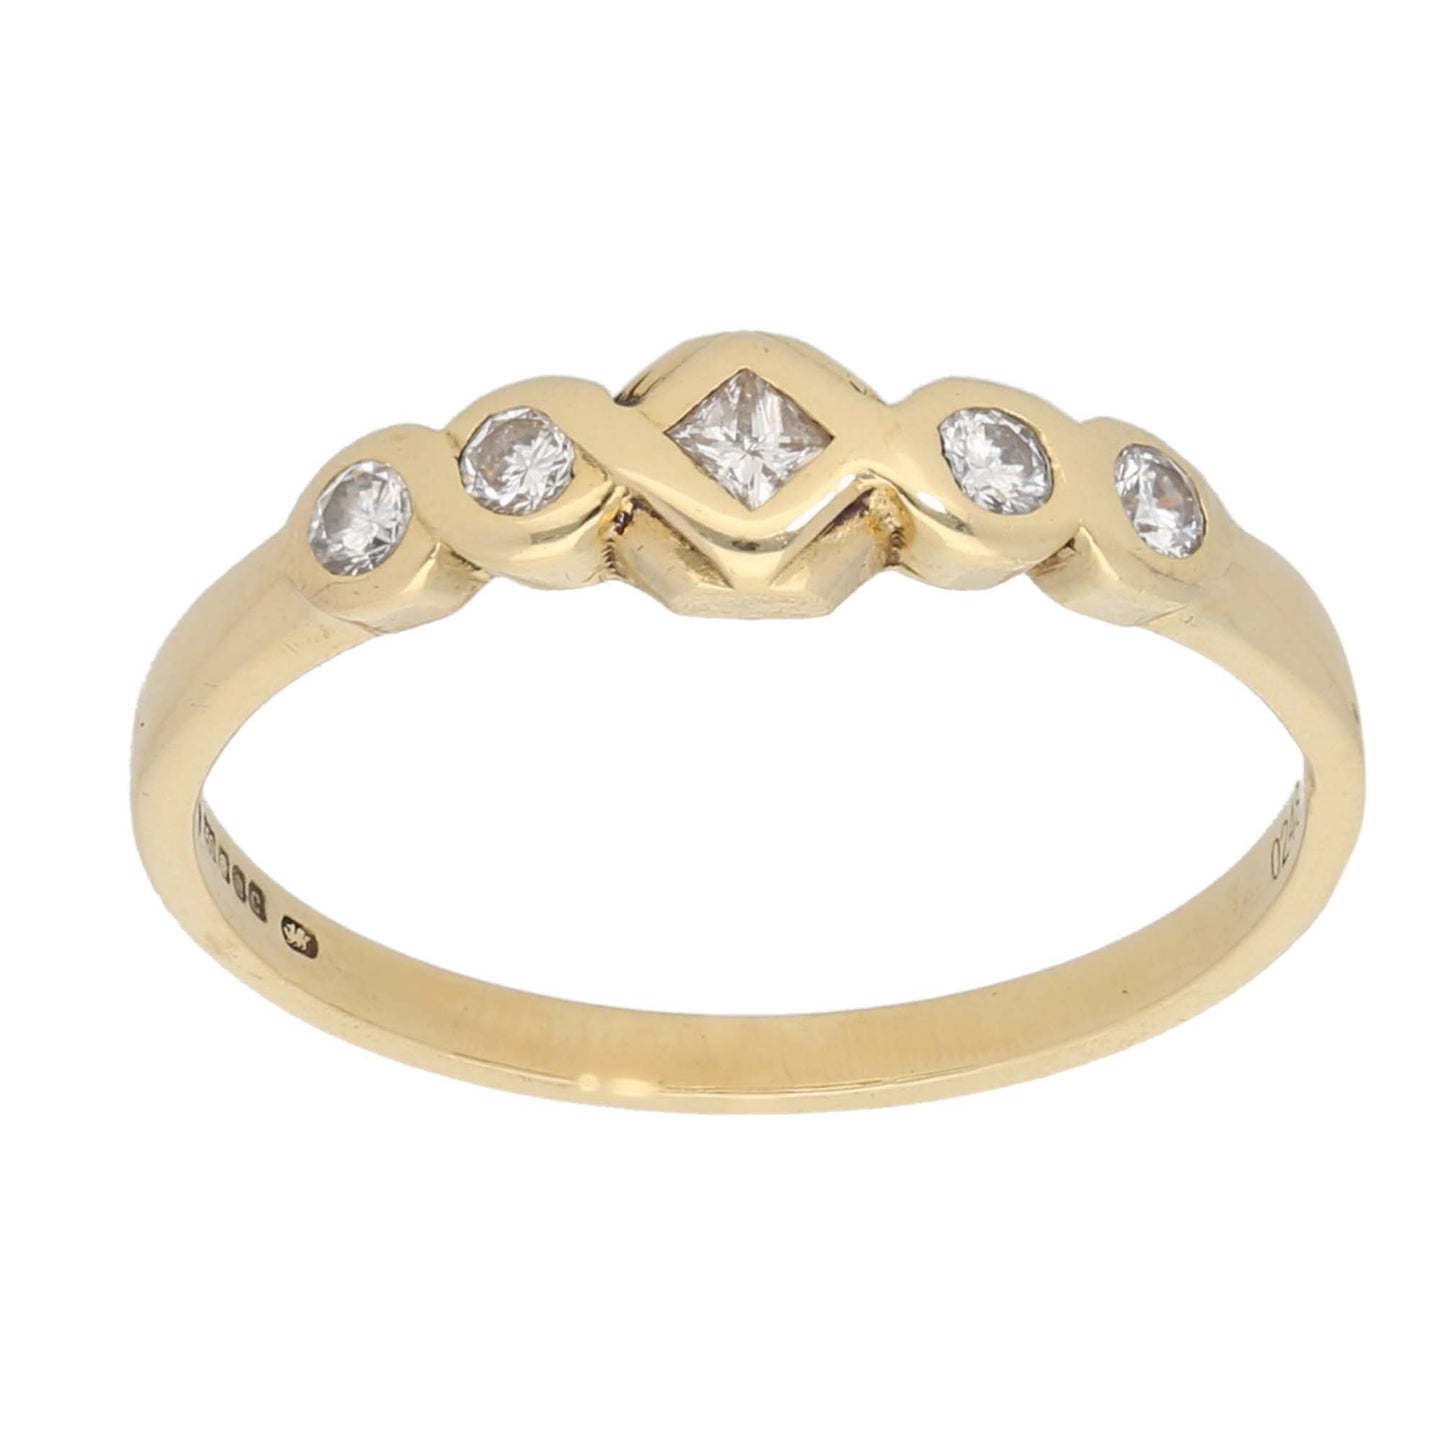 18ct Gold 0.05ct Square Cut Diamond & 0.03ct Round Cut Diamond Ladies Other Branded Ring